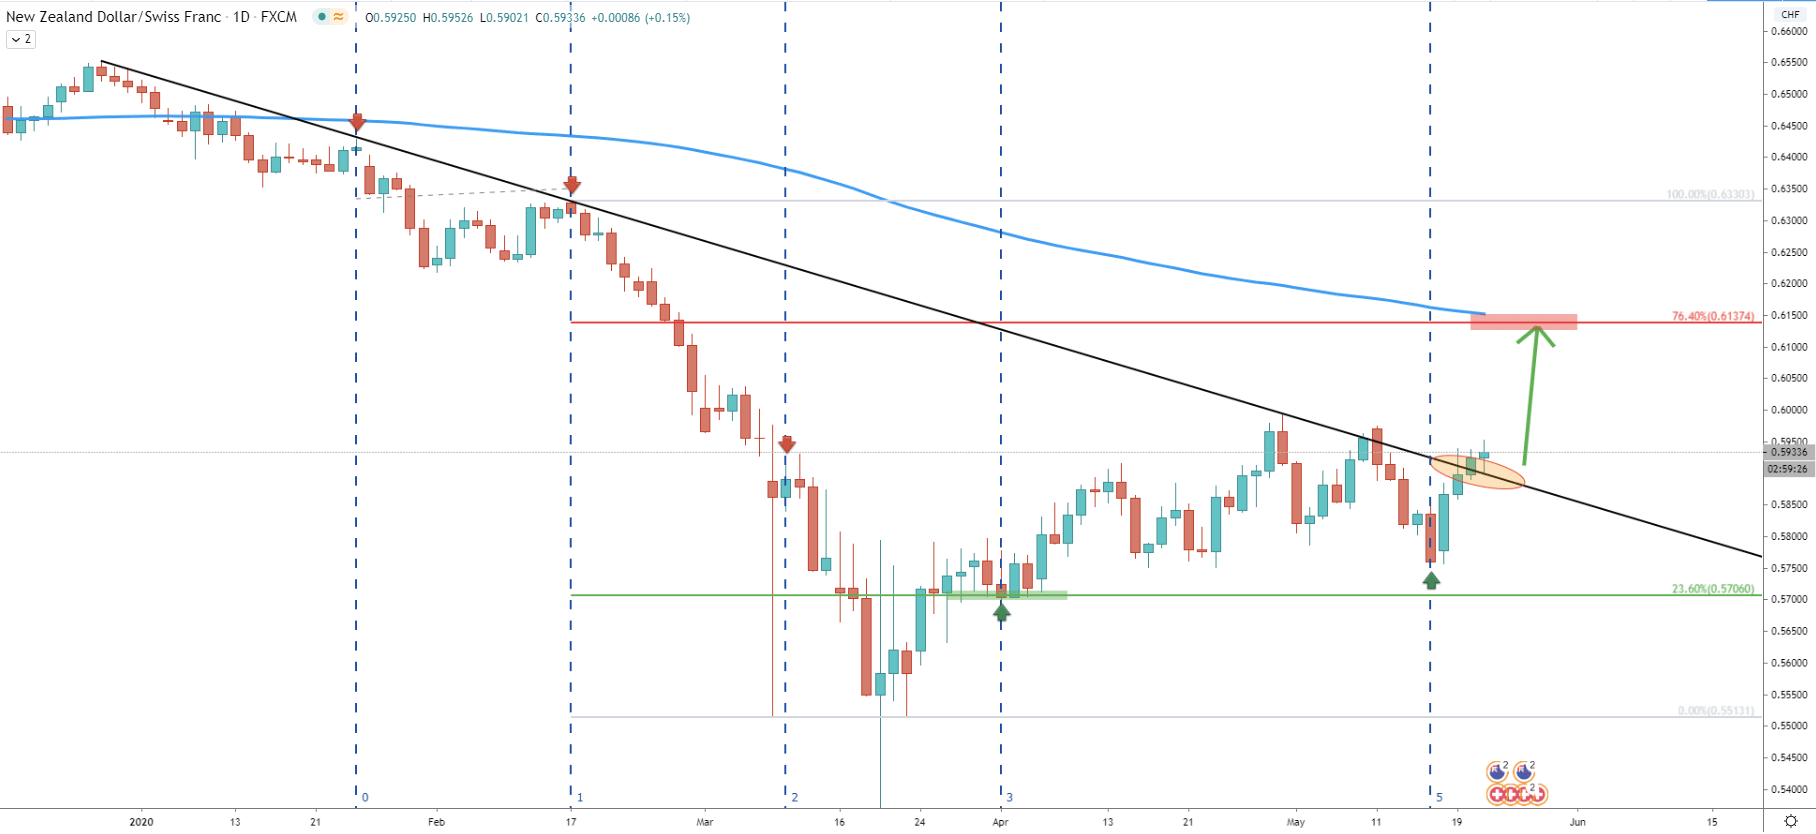 NZD/CHF Daily Technical Analysis 21 May 2020